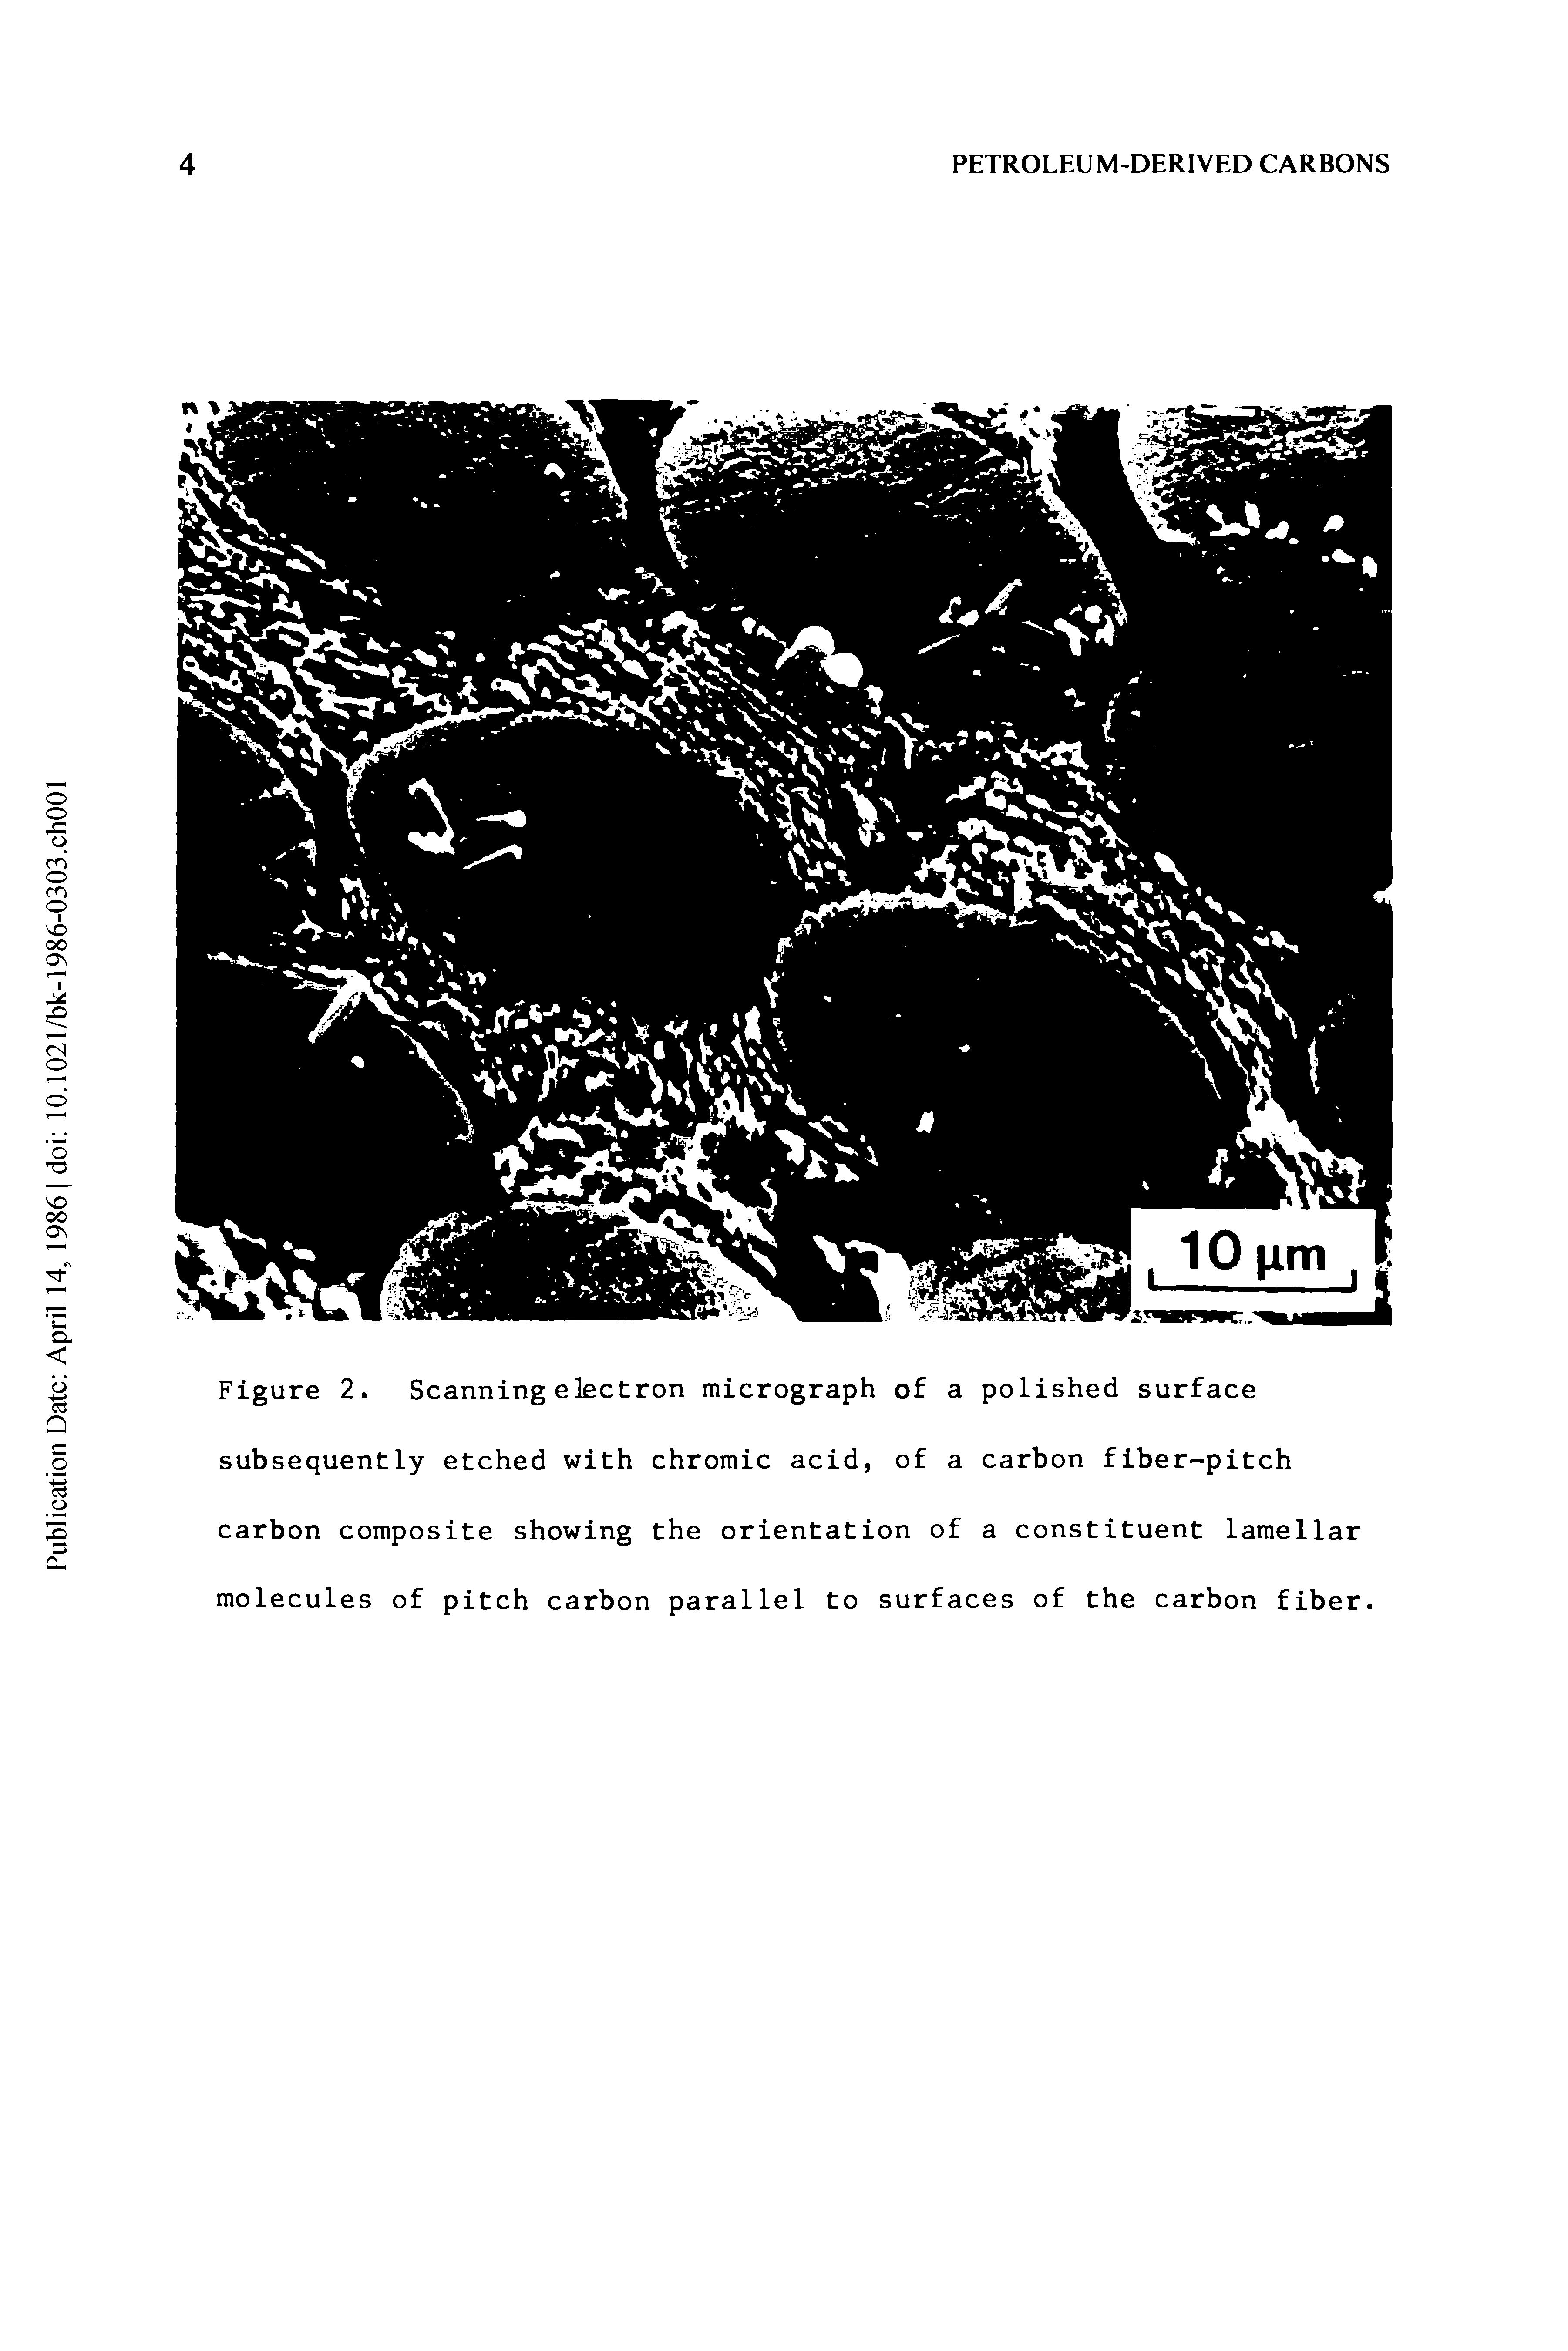 Figure 2. Scanning electron micrograph of a polished surface subsequently etched with chromic acid, of a carbon fiber-pitch carbon composite showing the orientation of a constituent lamellar molecules of pitch carbon parallel to surfaces of the carbon fiber.